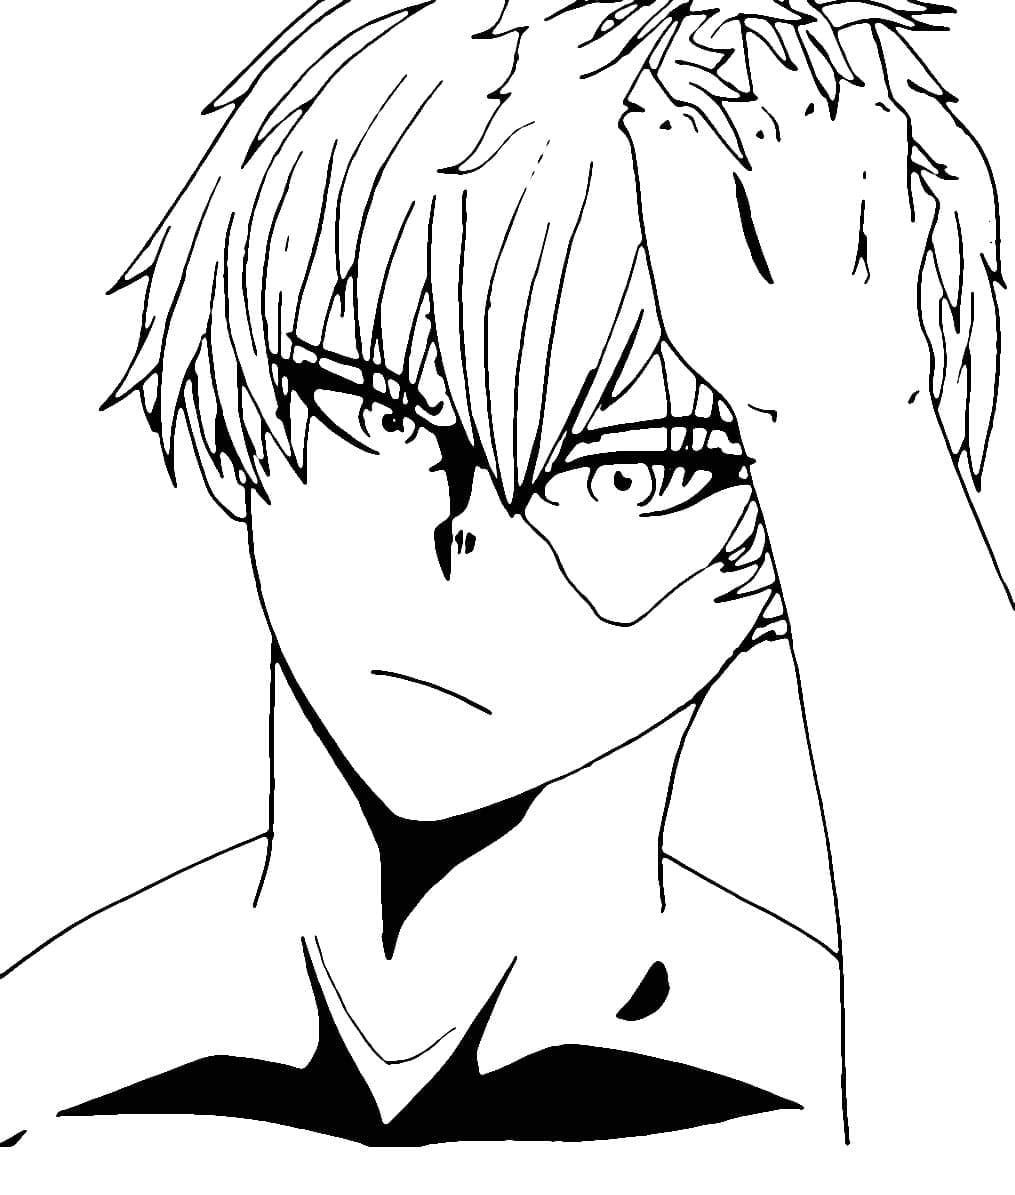 Awesome Shoto Todoroki coloring page - Download, Print or Color Online ...